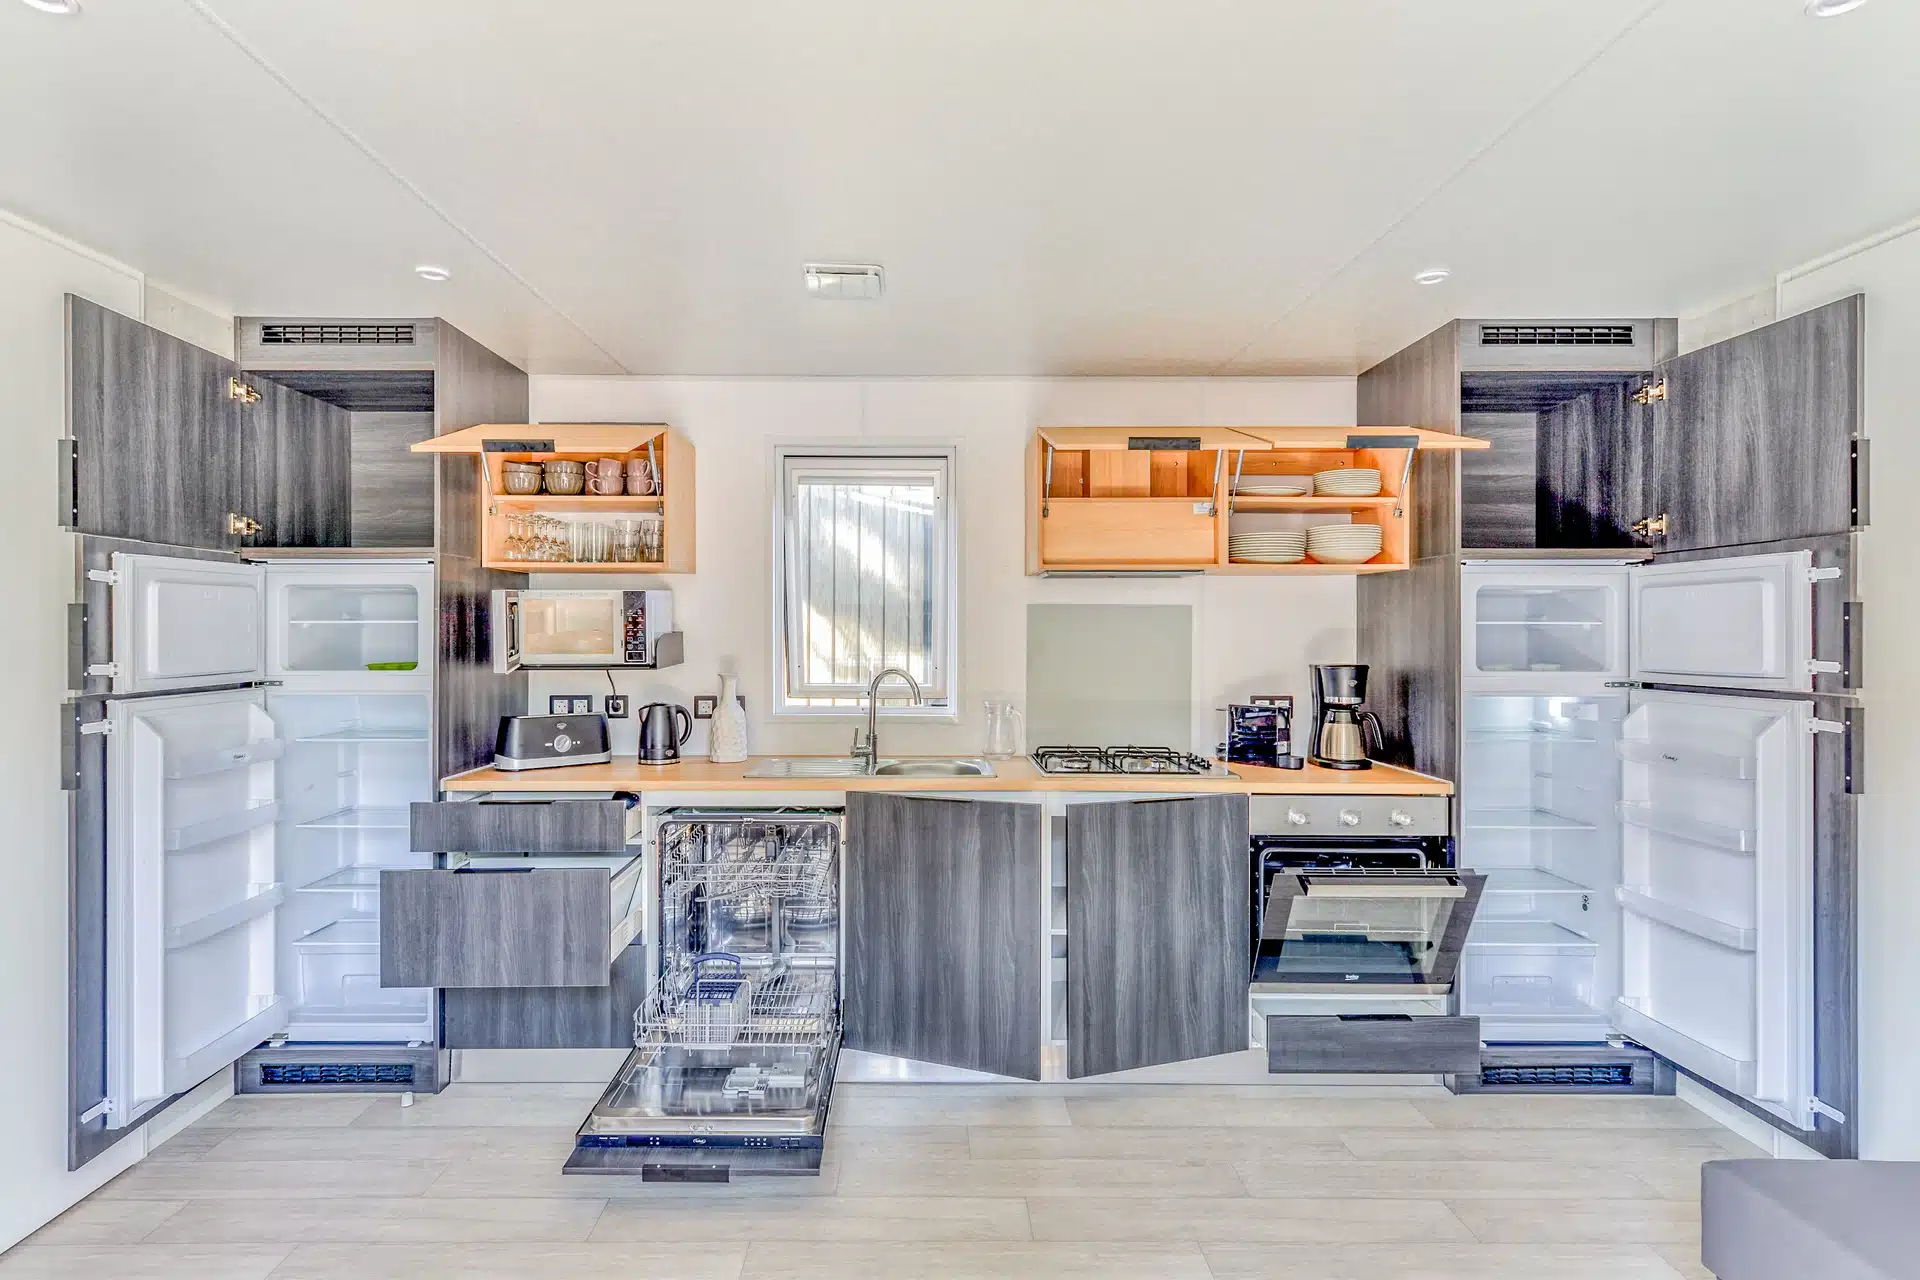 Mobile home kitchen